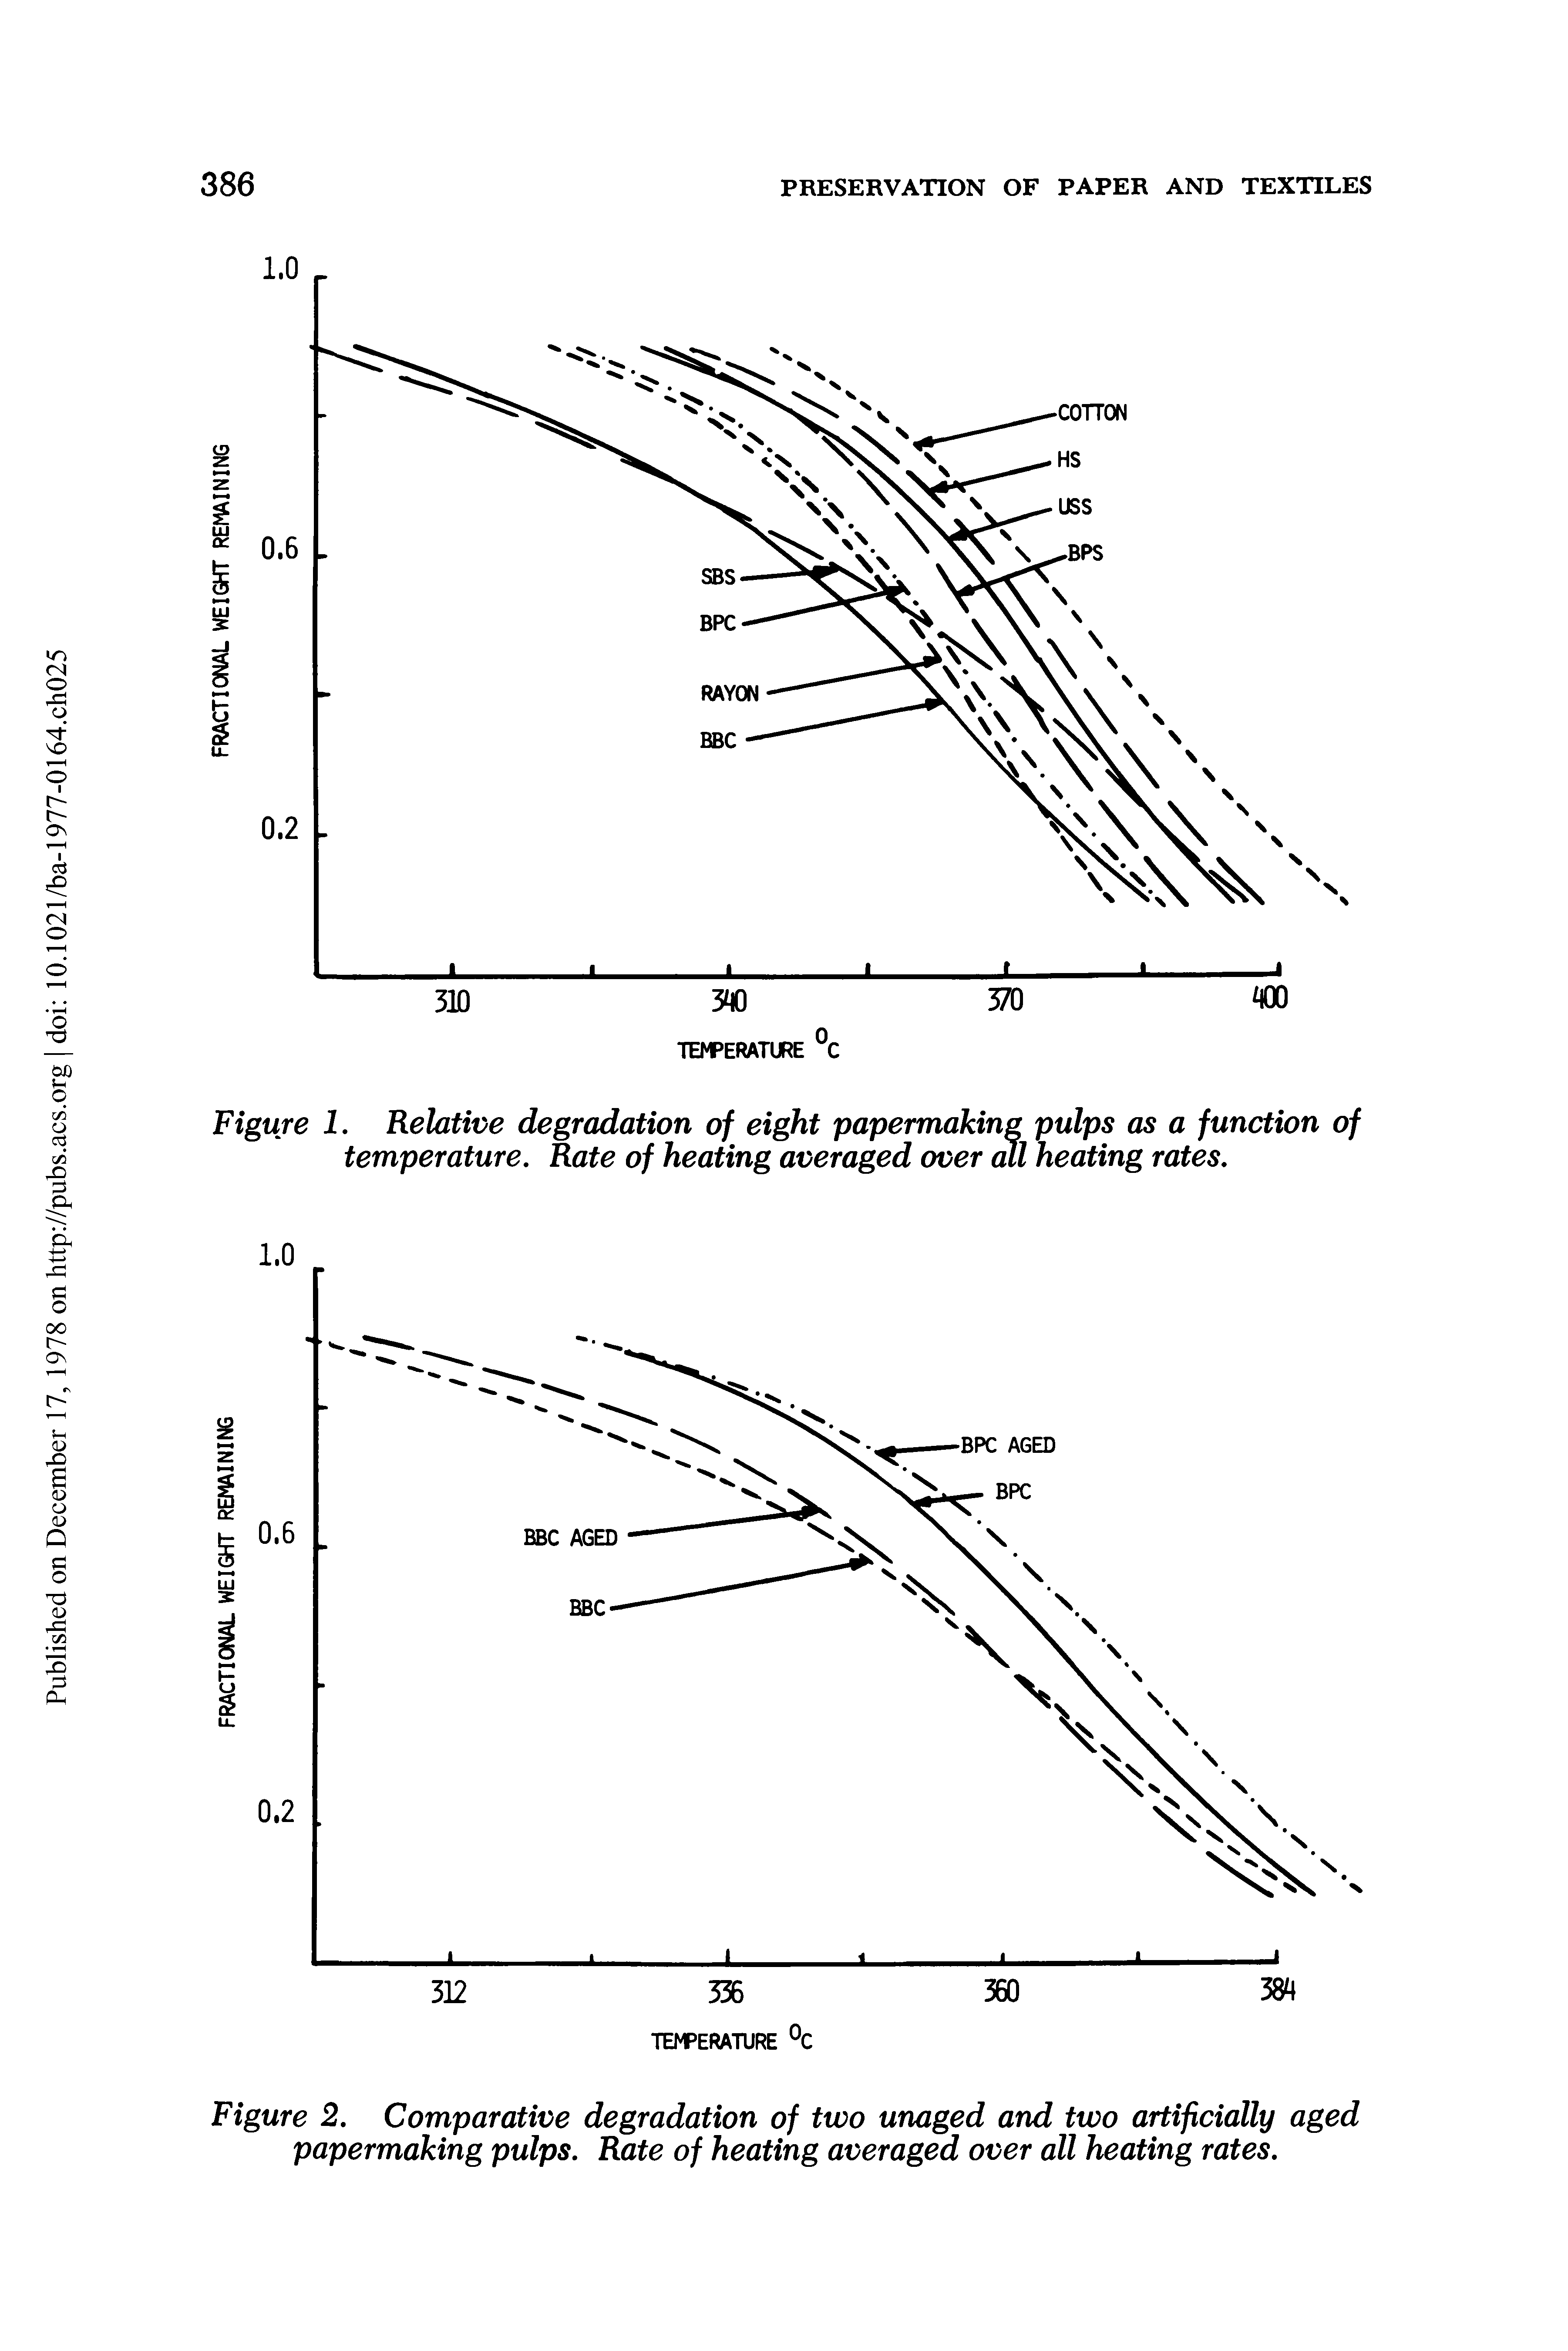 Figure 1. Relative degradation of eight papermaking pulps as a function of temperature. Rate of heating averaged over all heating rates.